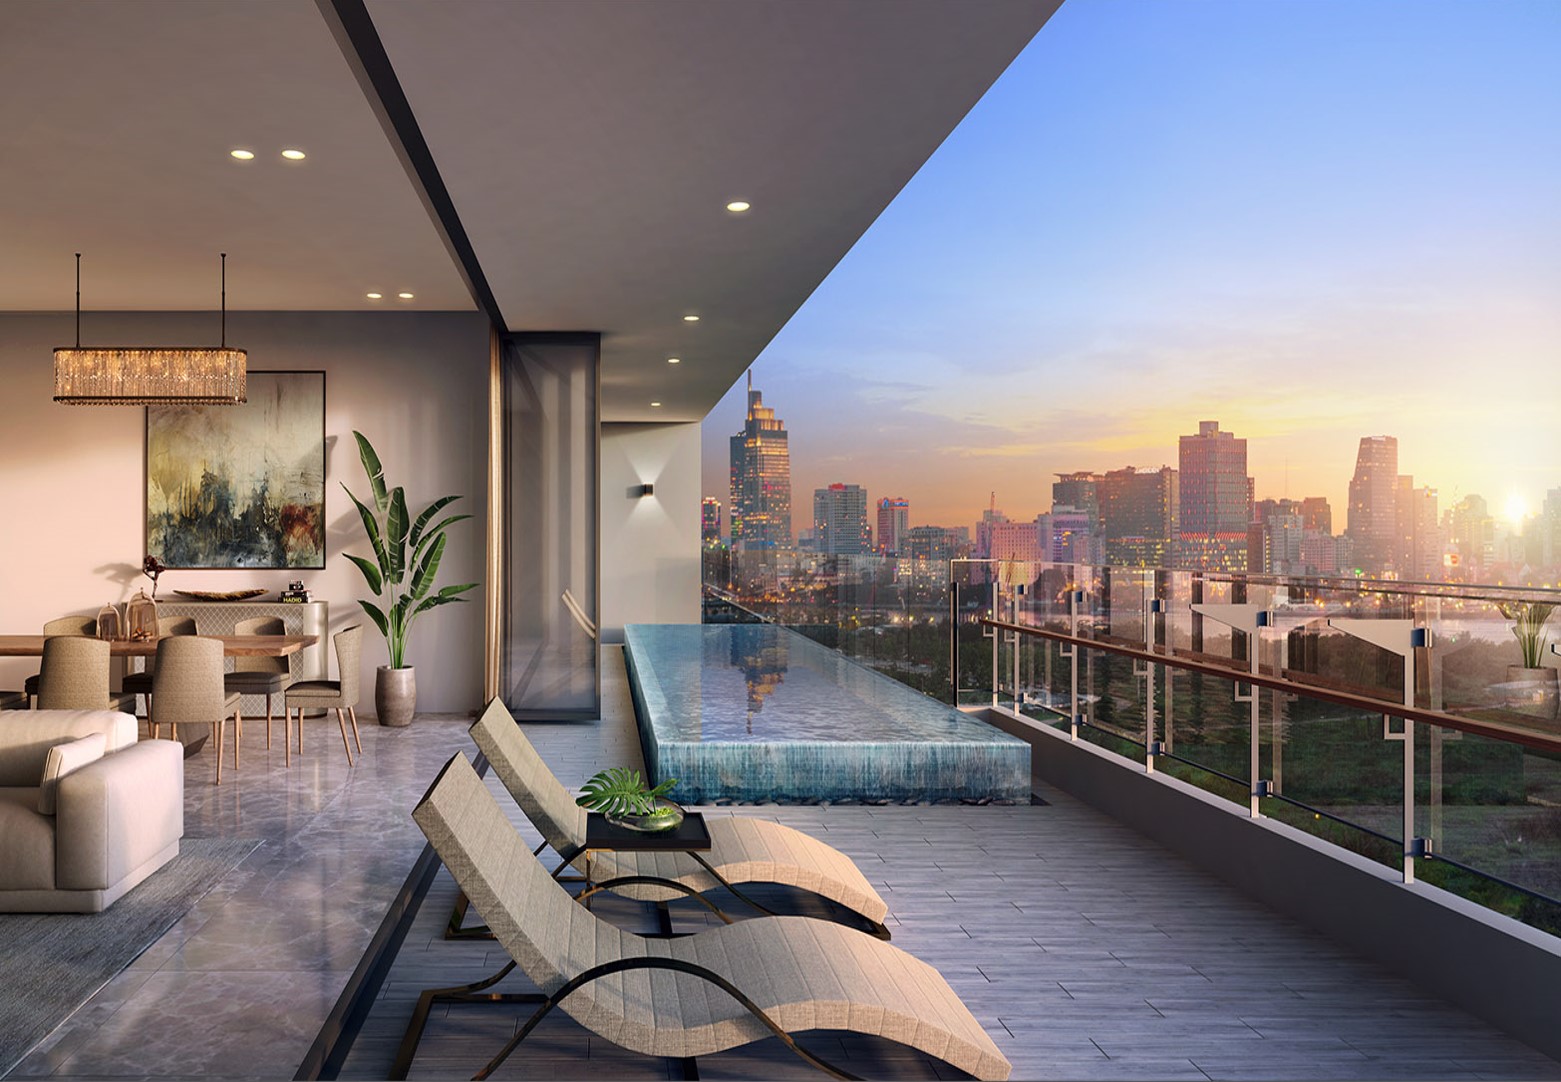 The River Thu Thiem 2 - Landmark 81 & Saigon River View! 3-Bedroom in The River Thu Thiem Fully Furnished - Ready to Move In